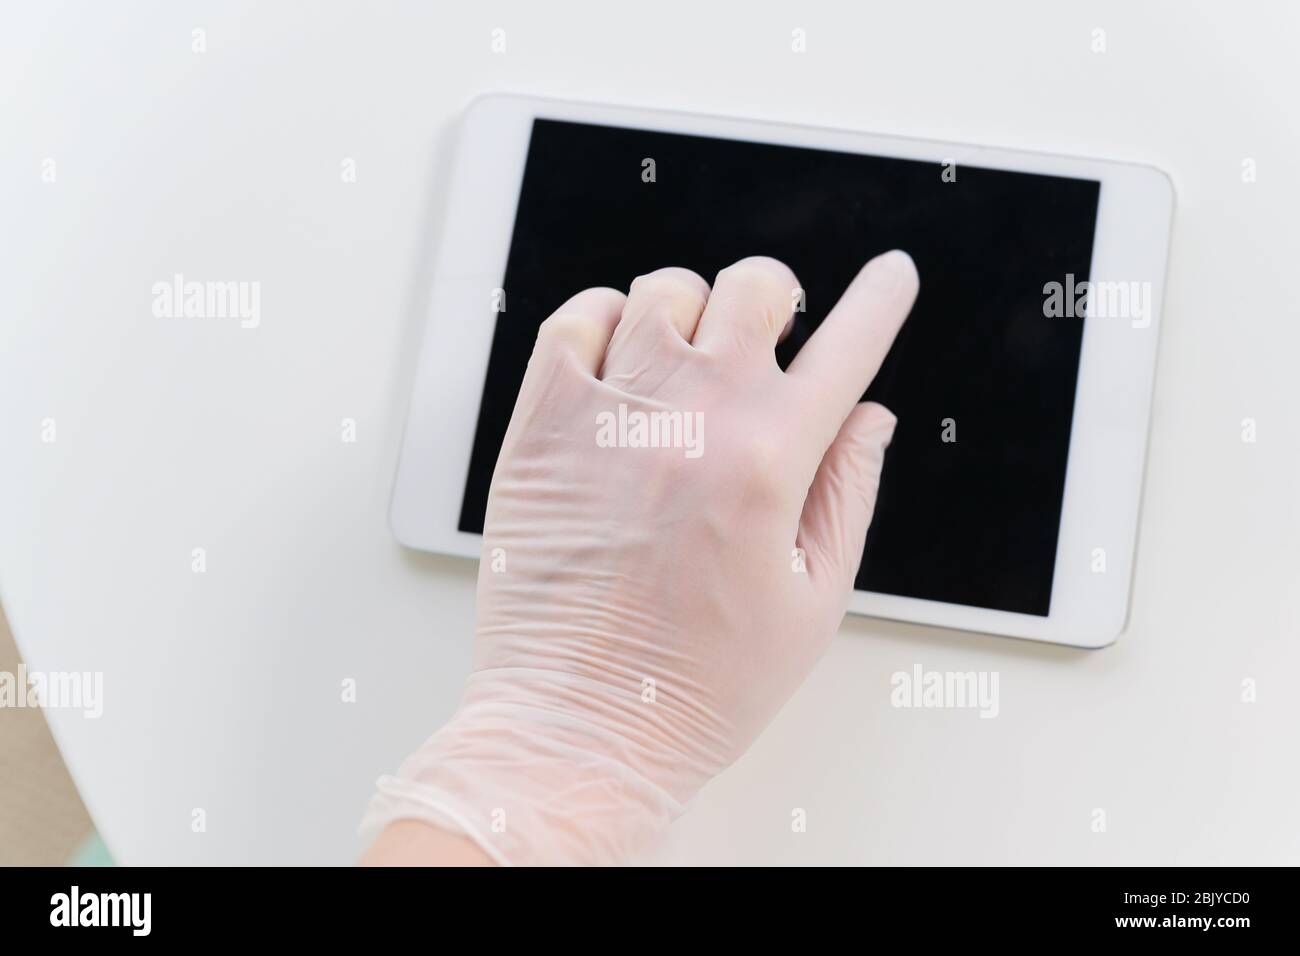 Hand in protective glove using tablet Stock Photo